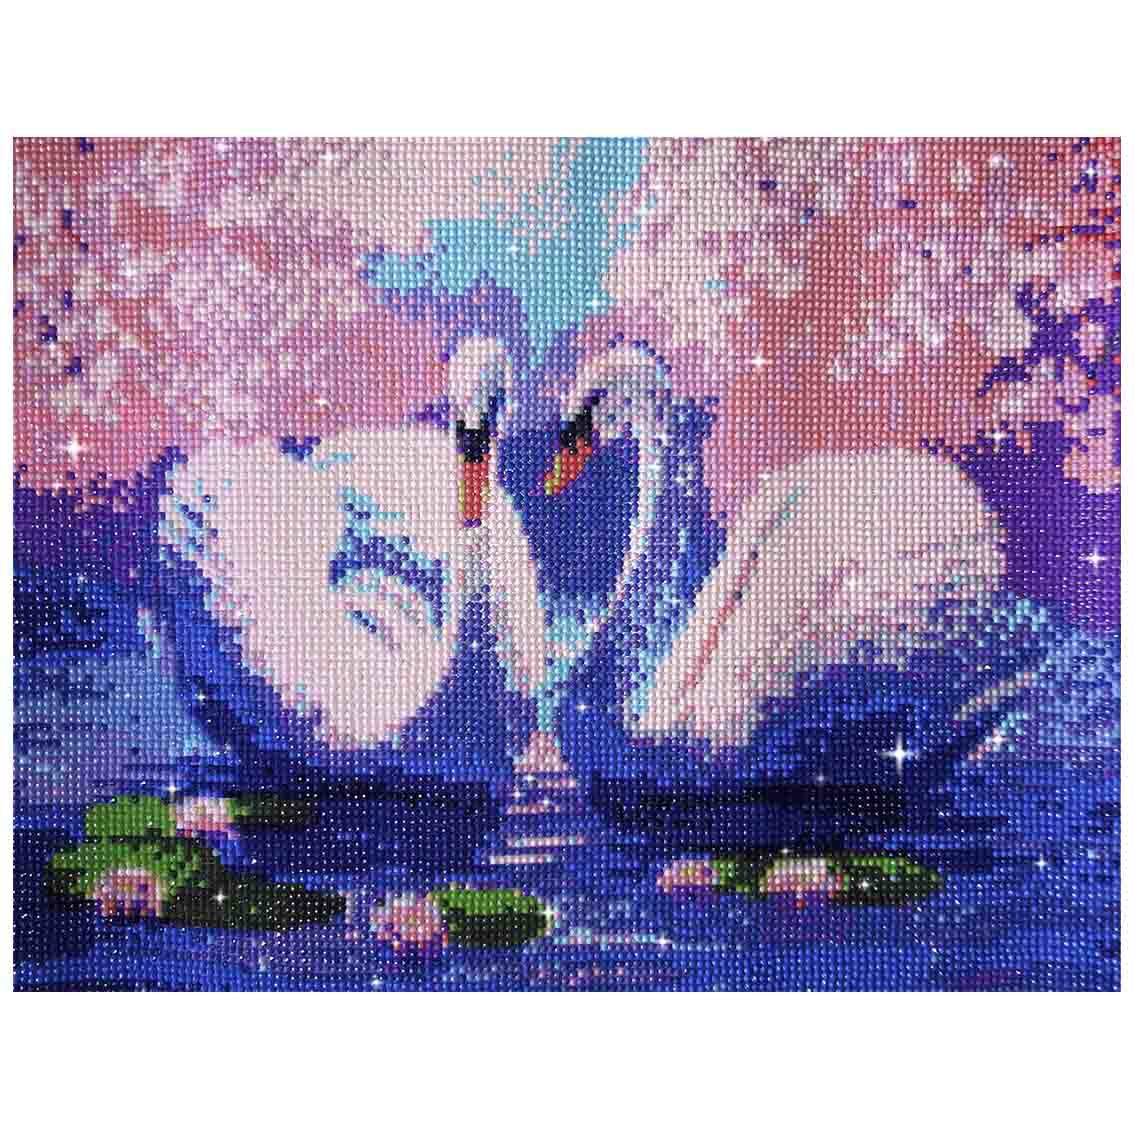 FINISHED DESIGN! SWANS WITH WATERLILIES 30*40cm